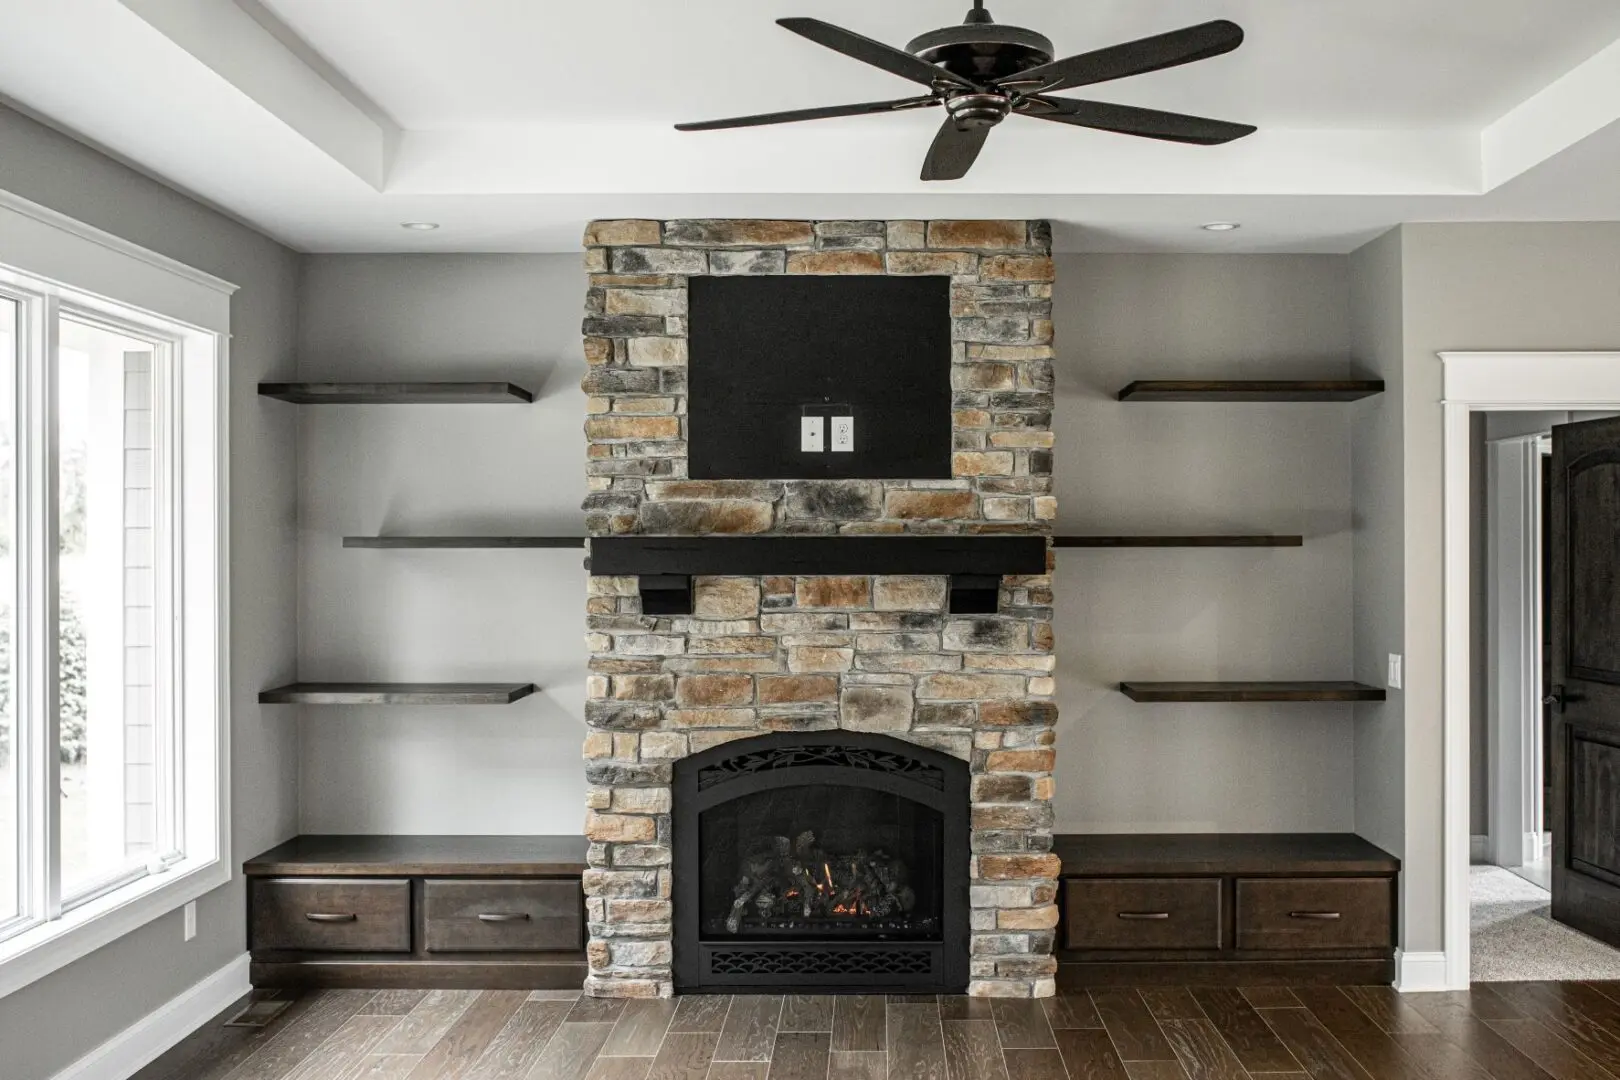 Michigan Valley Homes - The Windemere in Jackson - fireplace